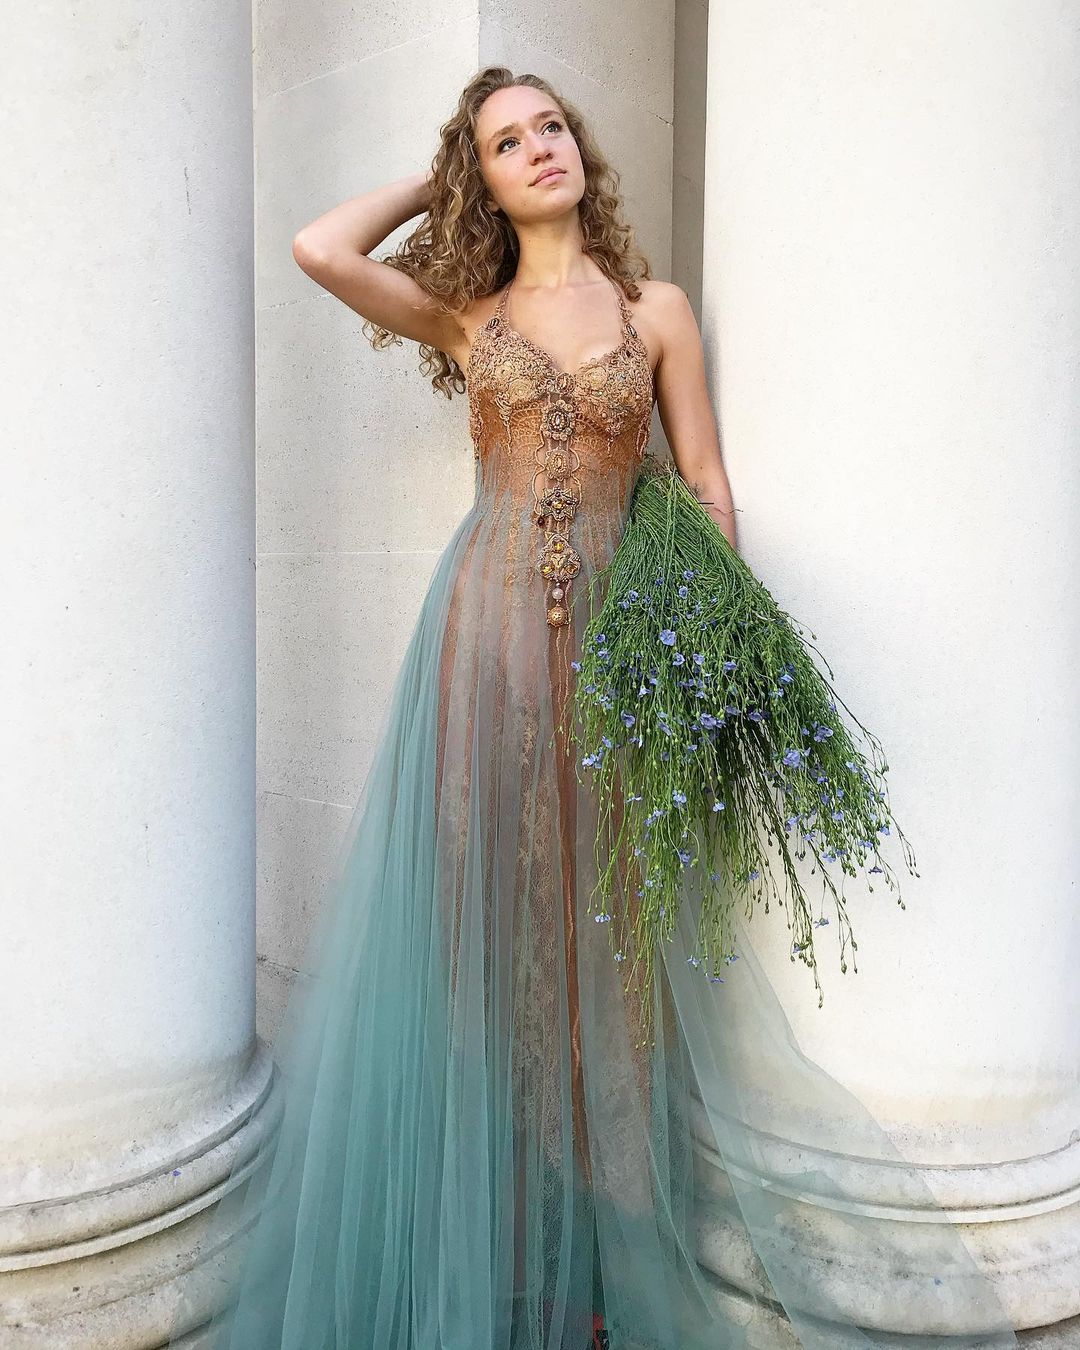 35 Dresses Straight From Fairy Tales Designed By French Artist Sylvie Facon (New Pics)